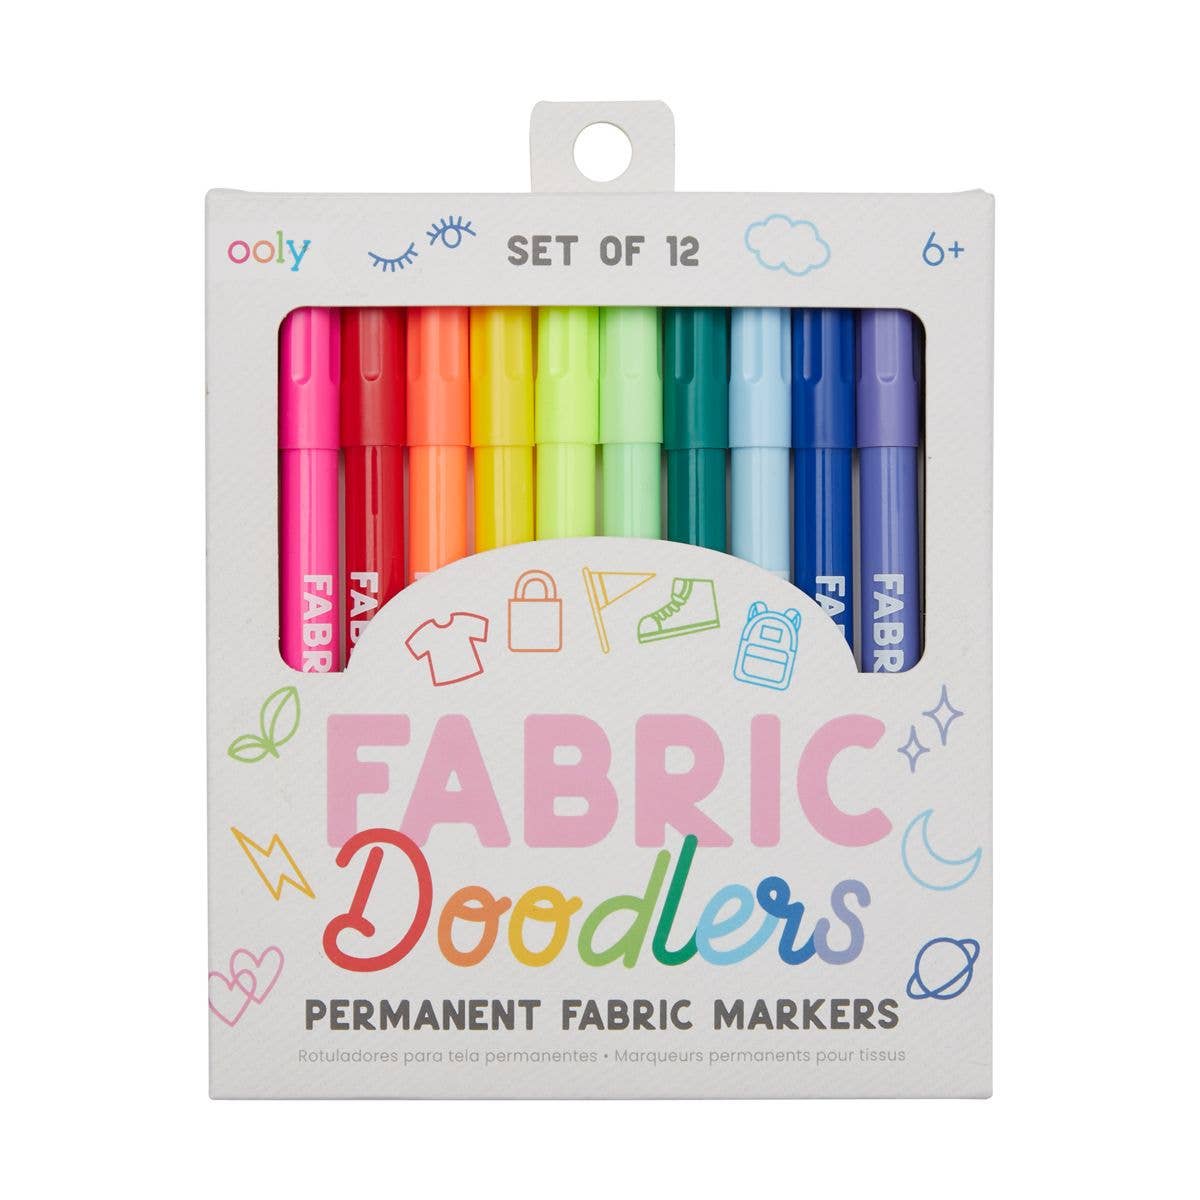 Ooly Pastel Hues Markers (Set of 12)